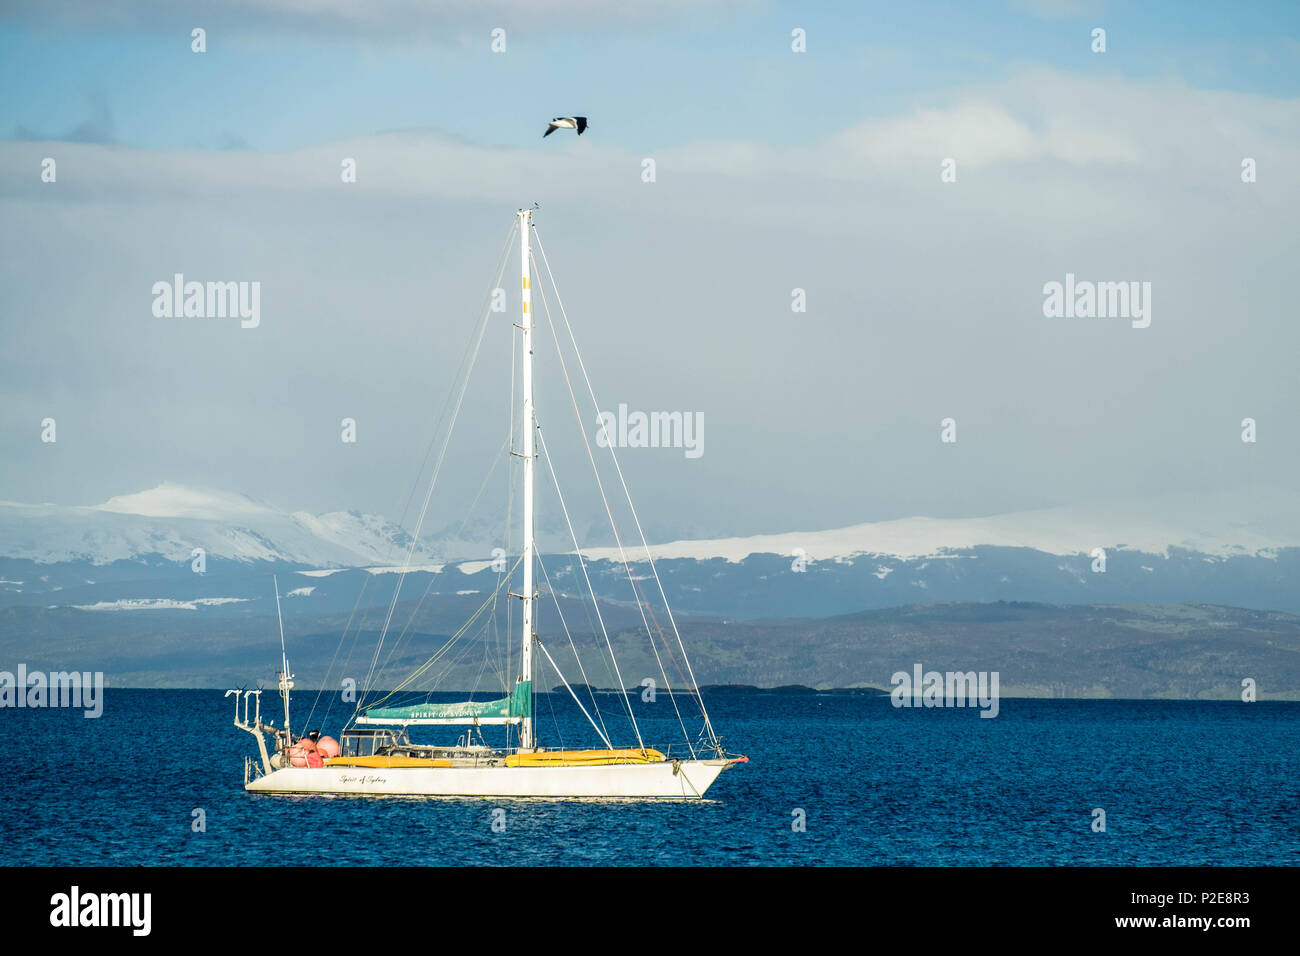 A saling boat crosses the Beagle Channel near Ushuaia. Sailing is popular in this part of the world where the islands offer stunning sceneries. Stock Photo